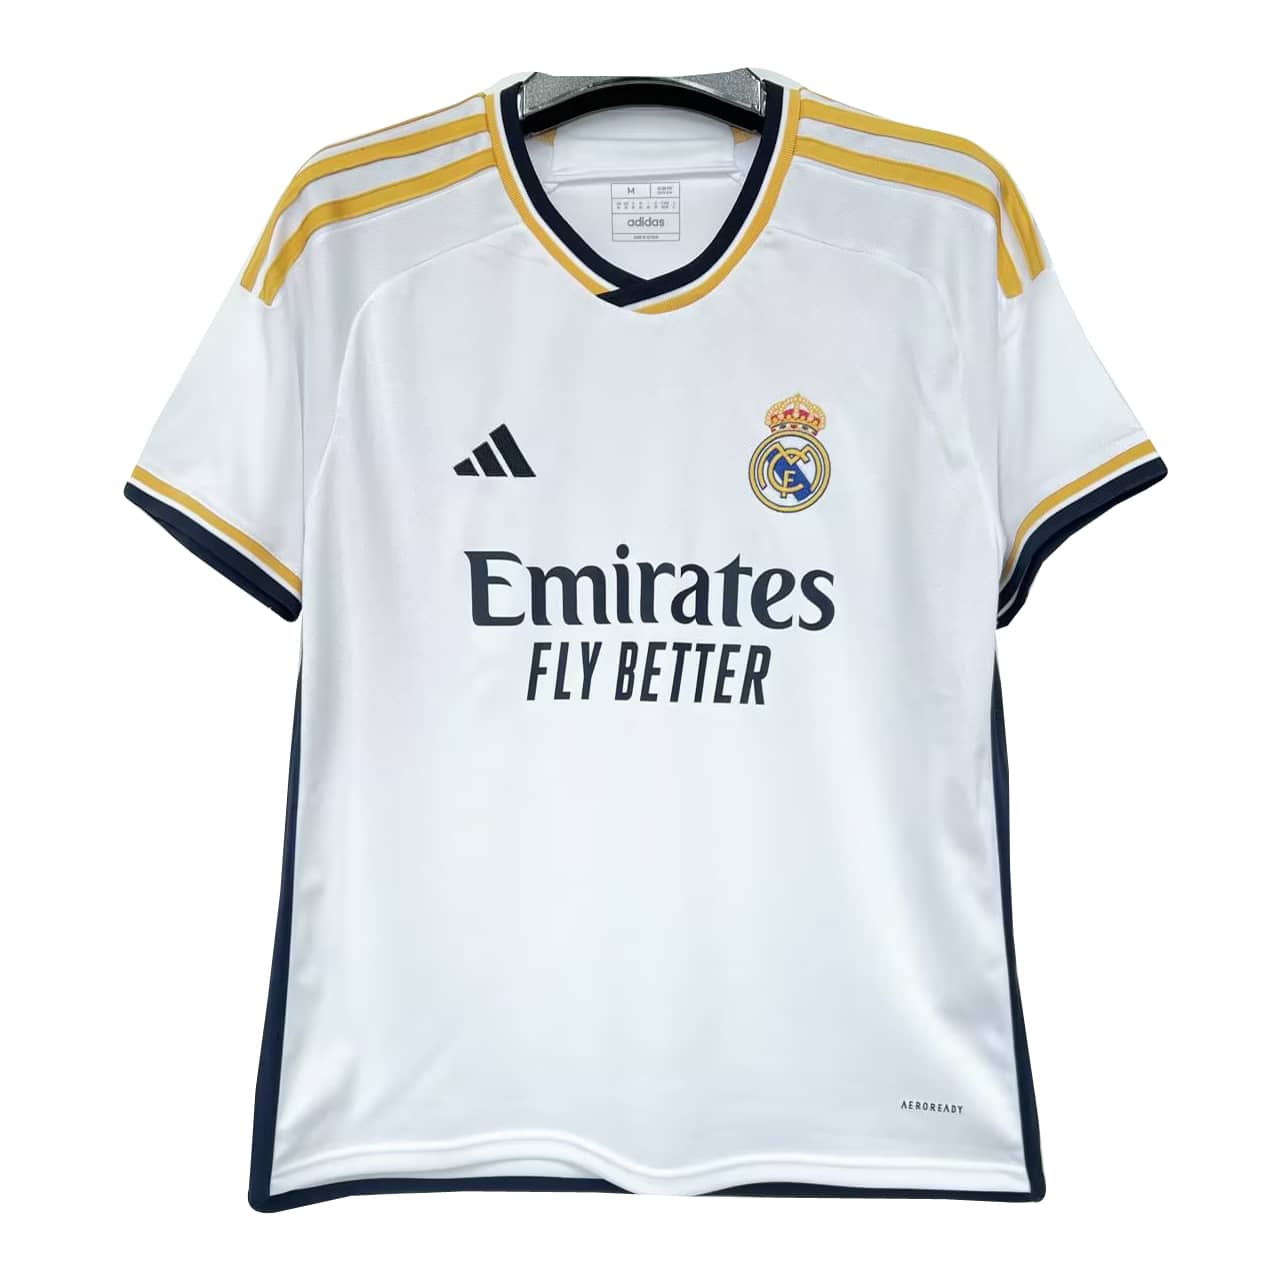 Adidas Men's Real Madrid Home Jersey - White, M